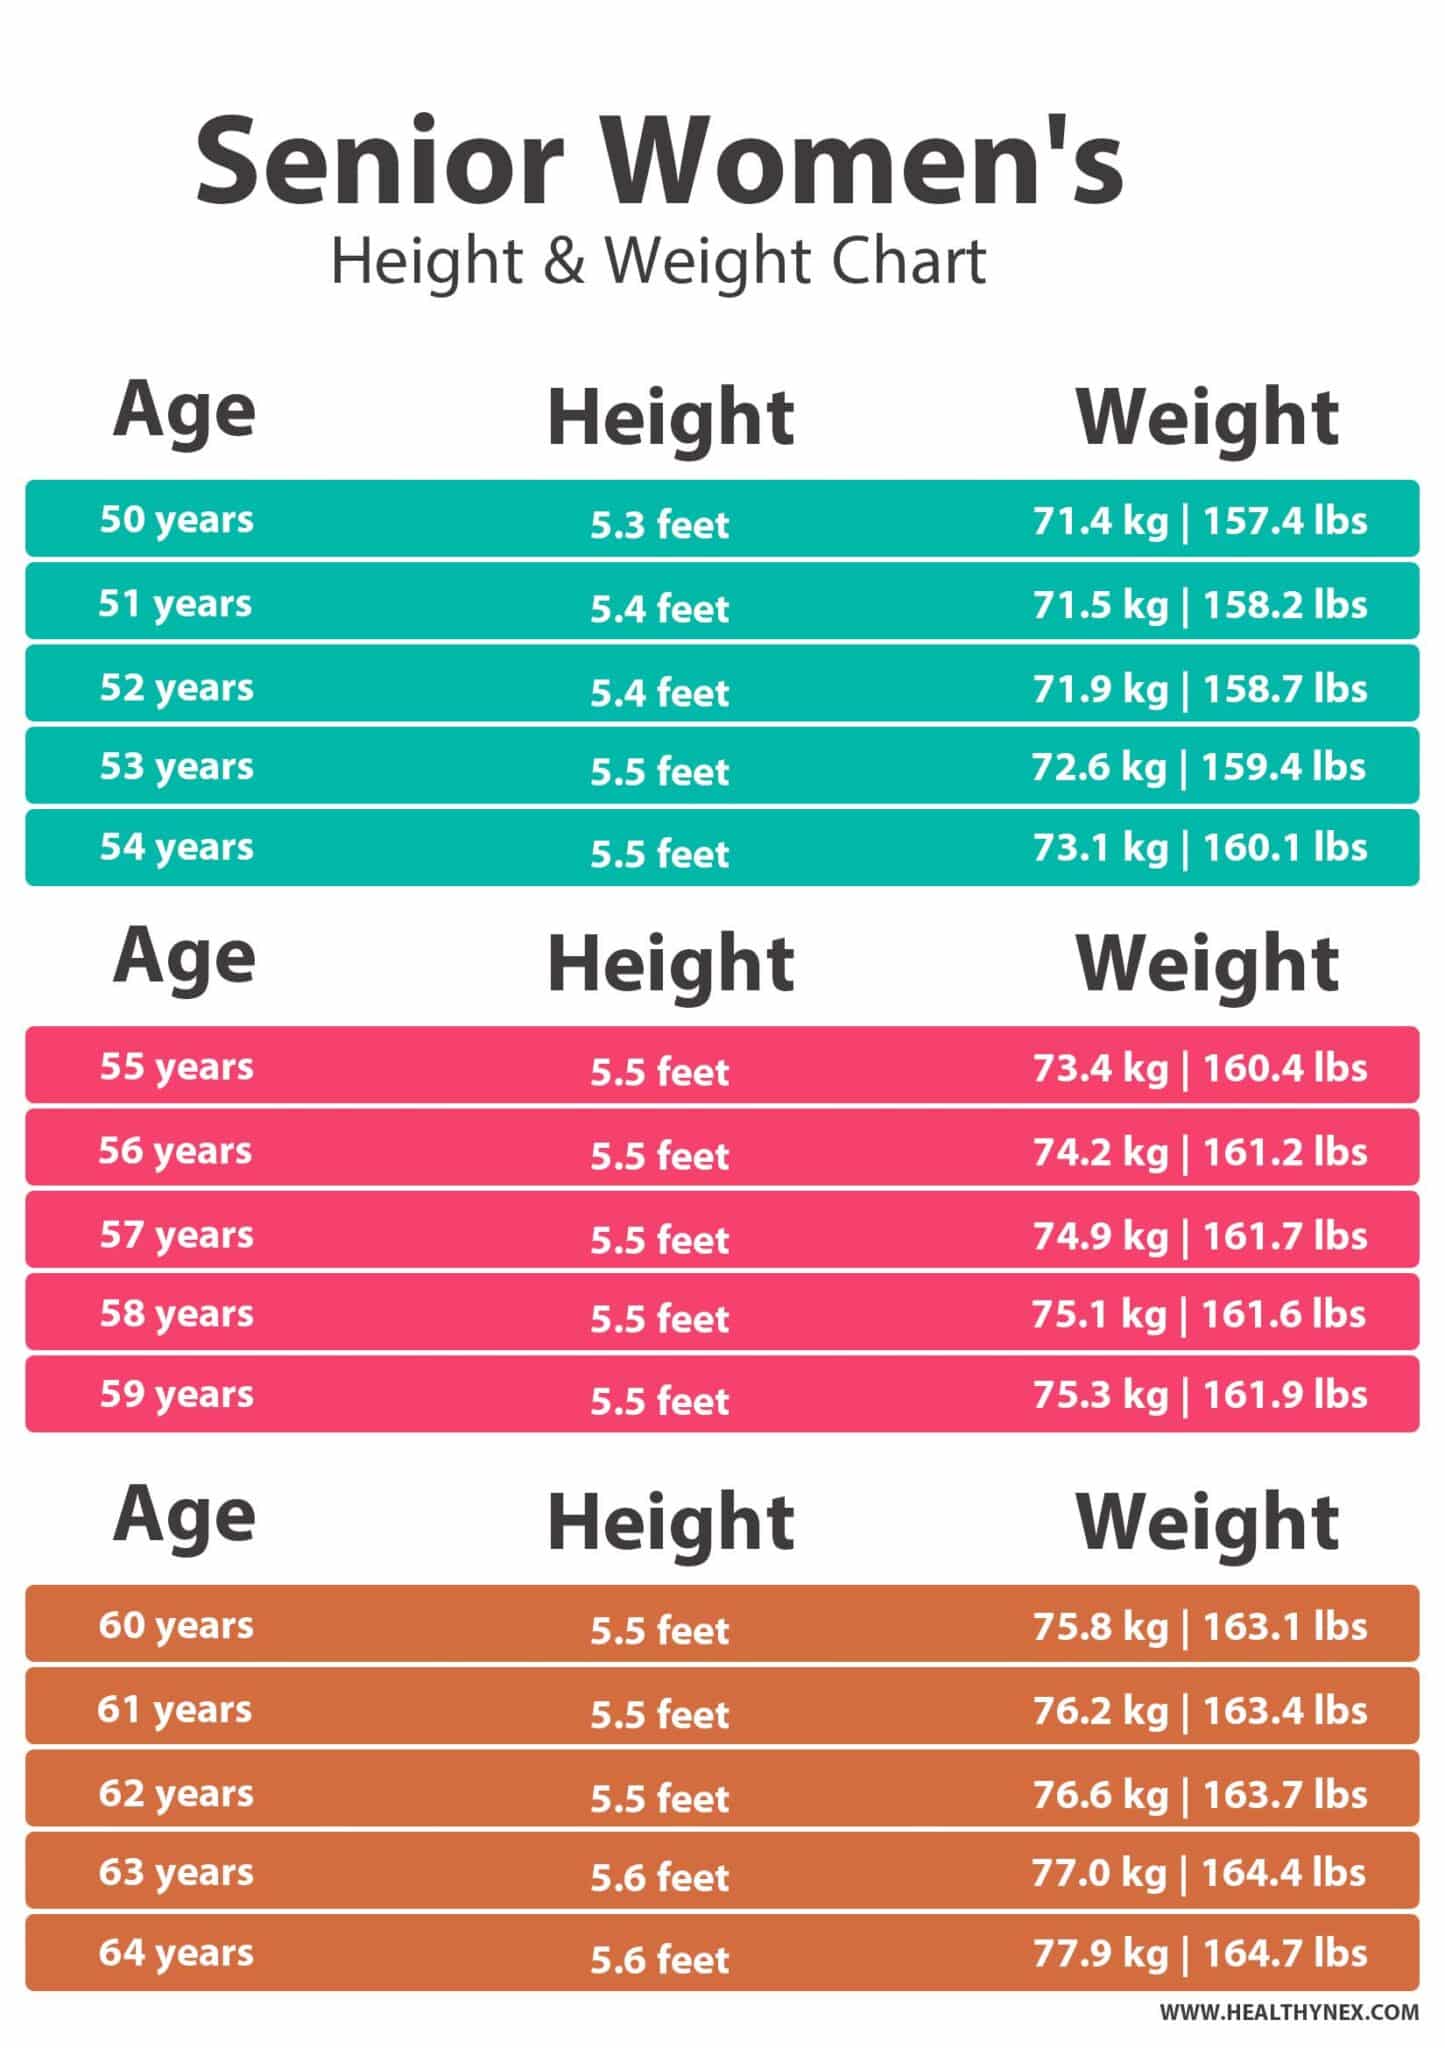 BMI Weight Chart For Seniors Female - Over 50 Years